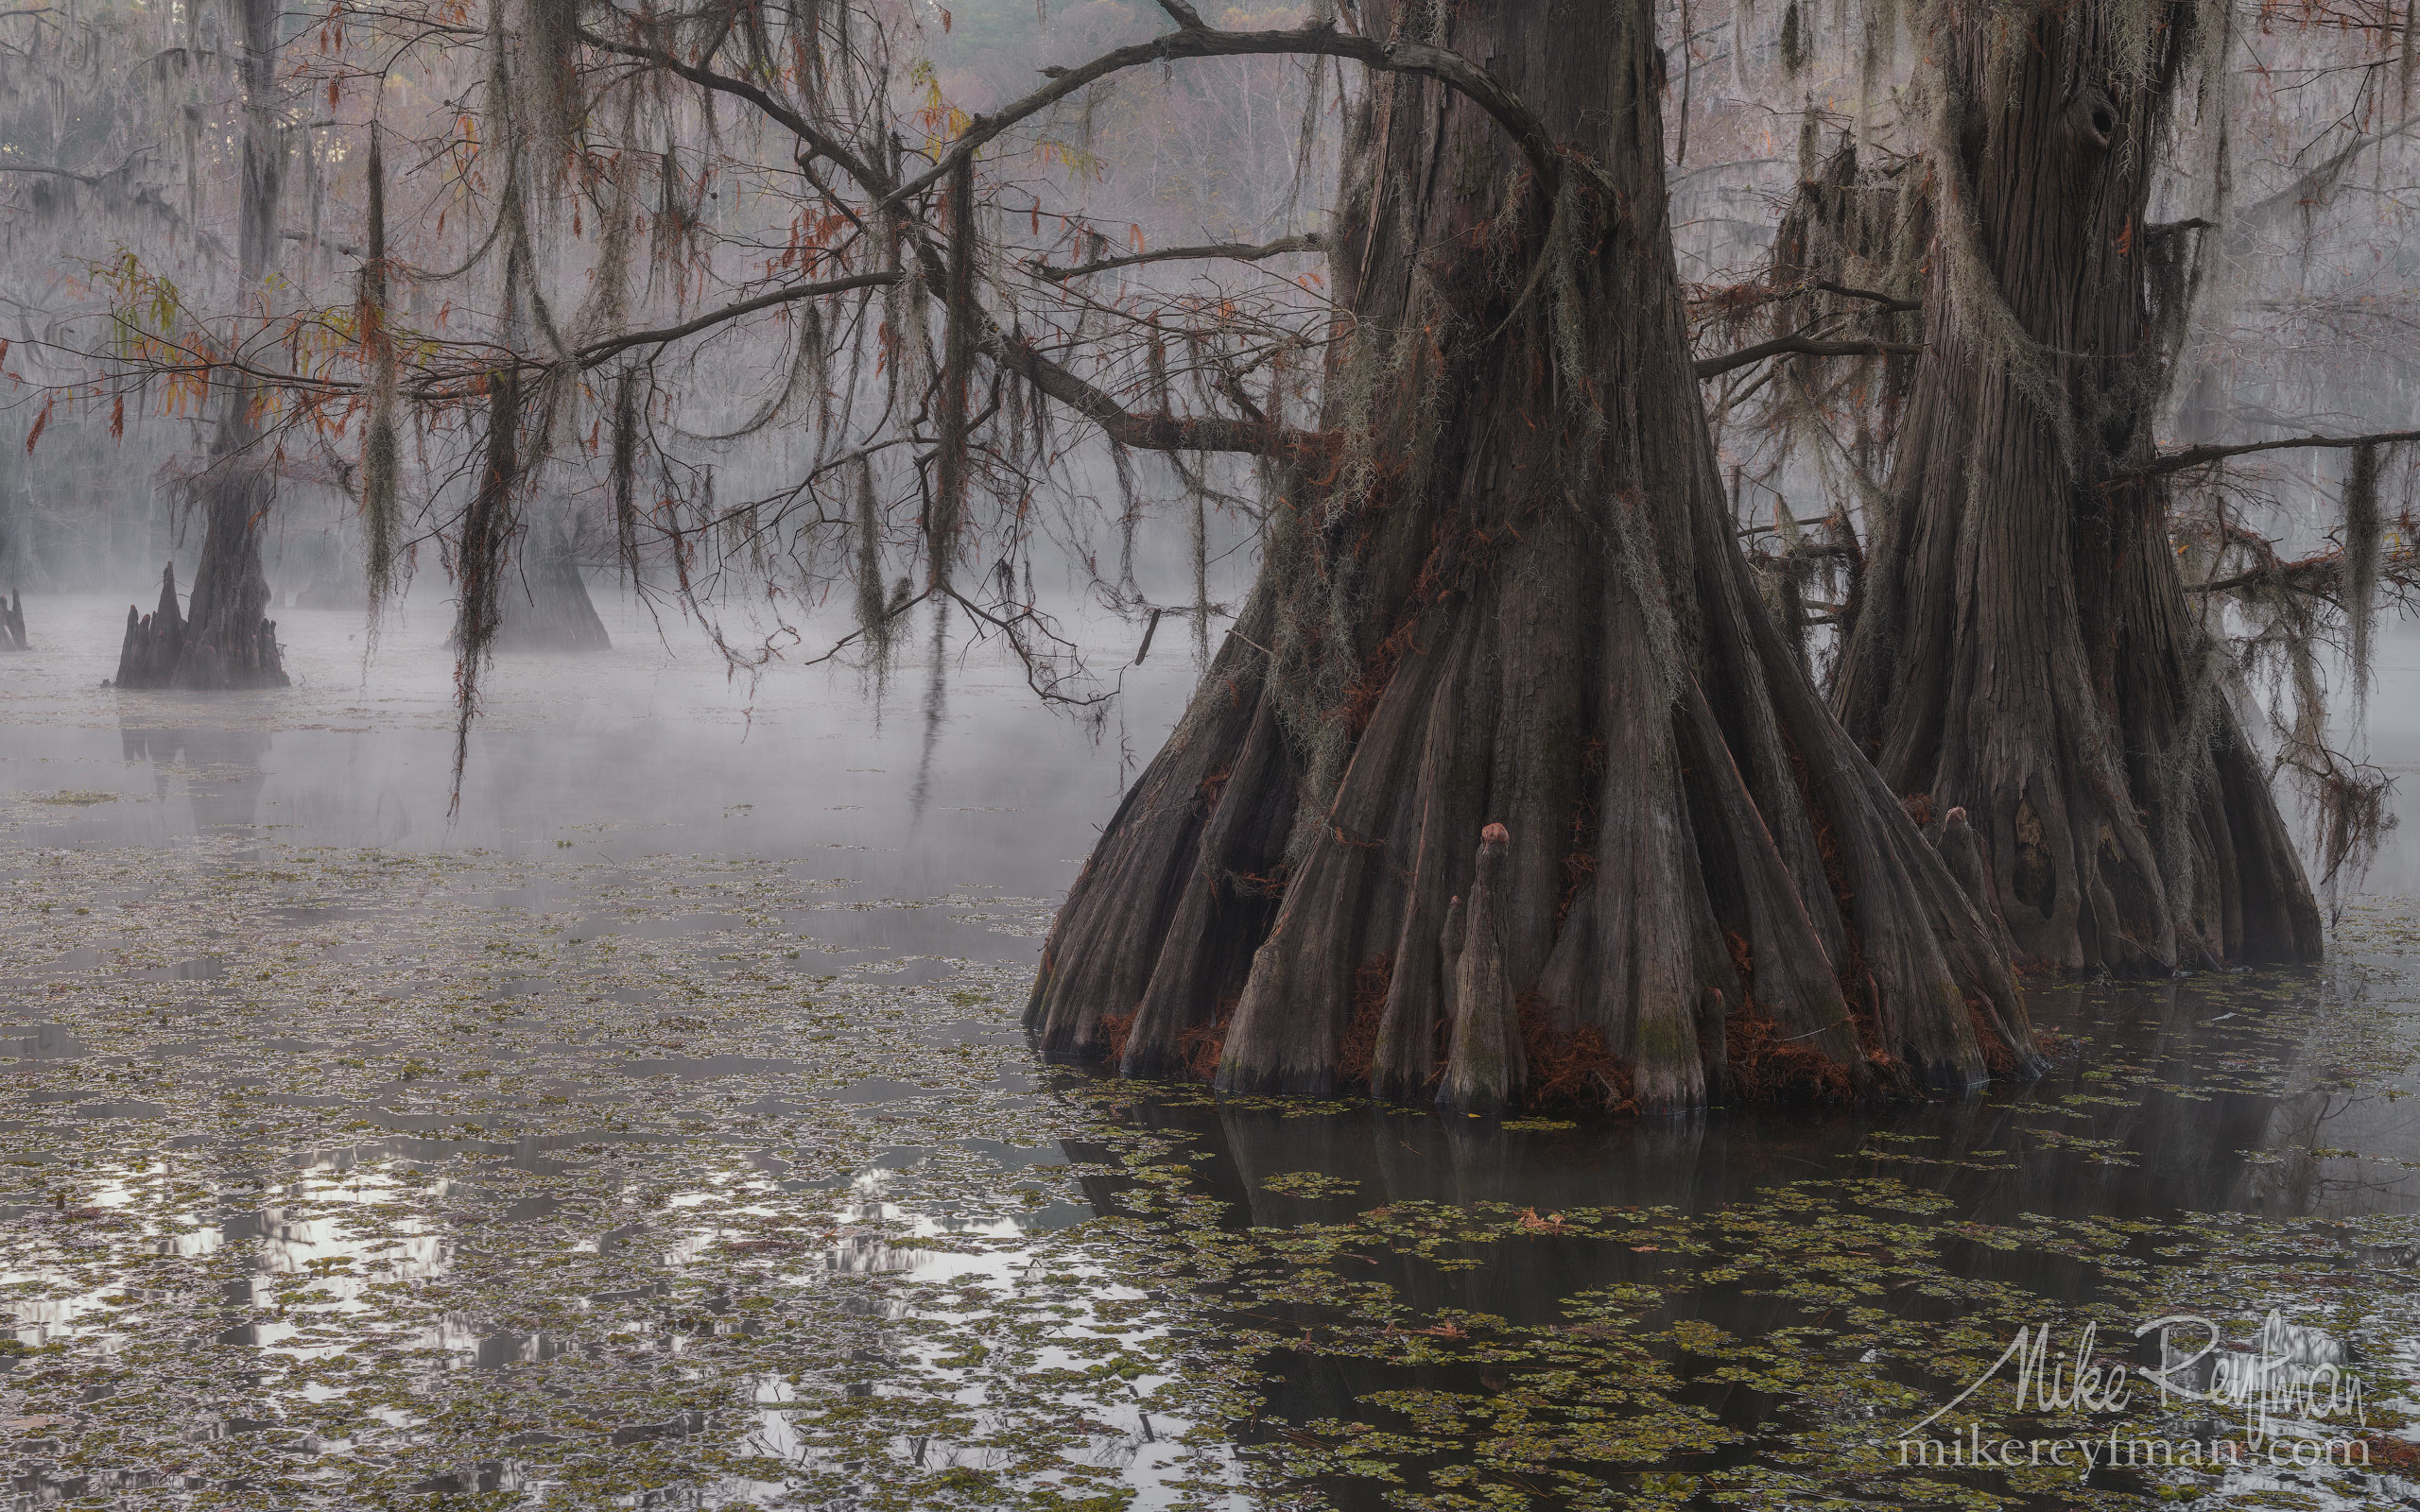 Bald Cypress trees in the swamp. Foggy morning on Caddo Lake